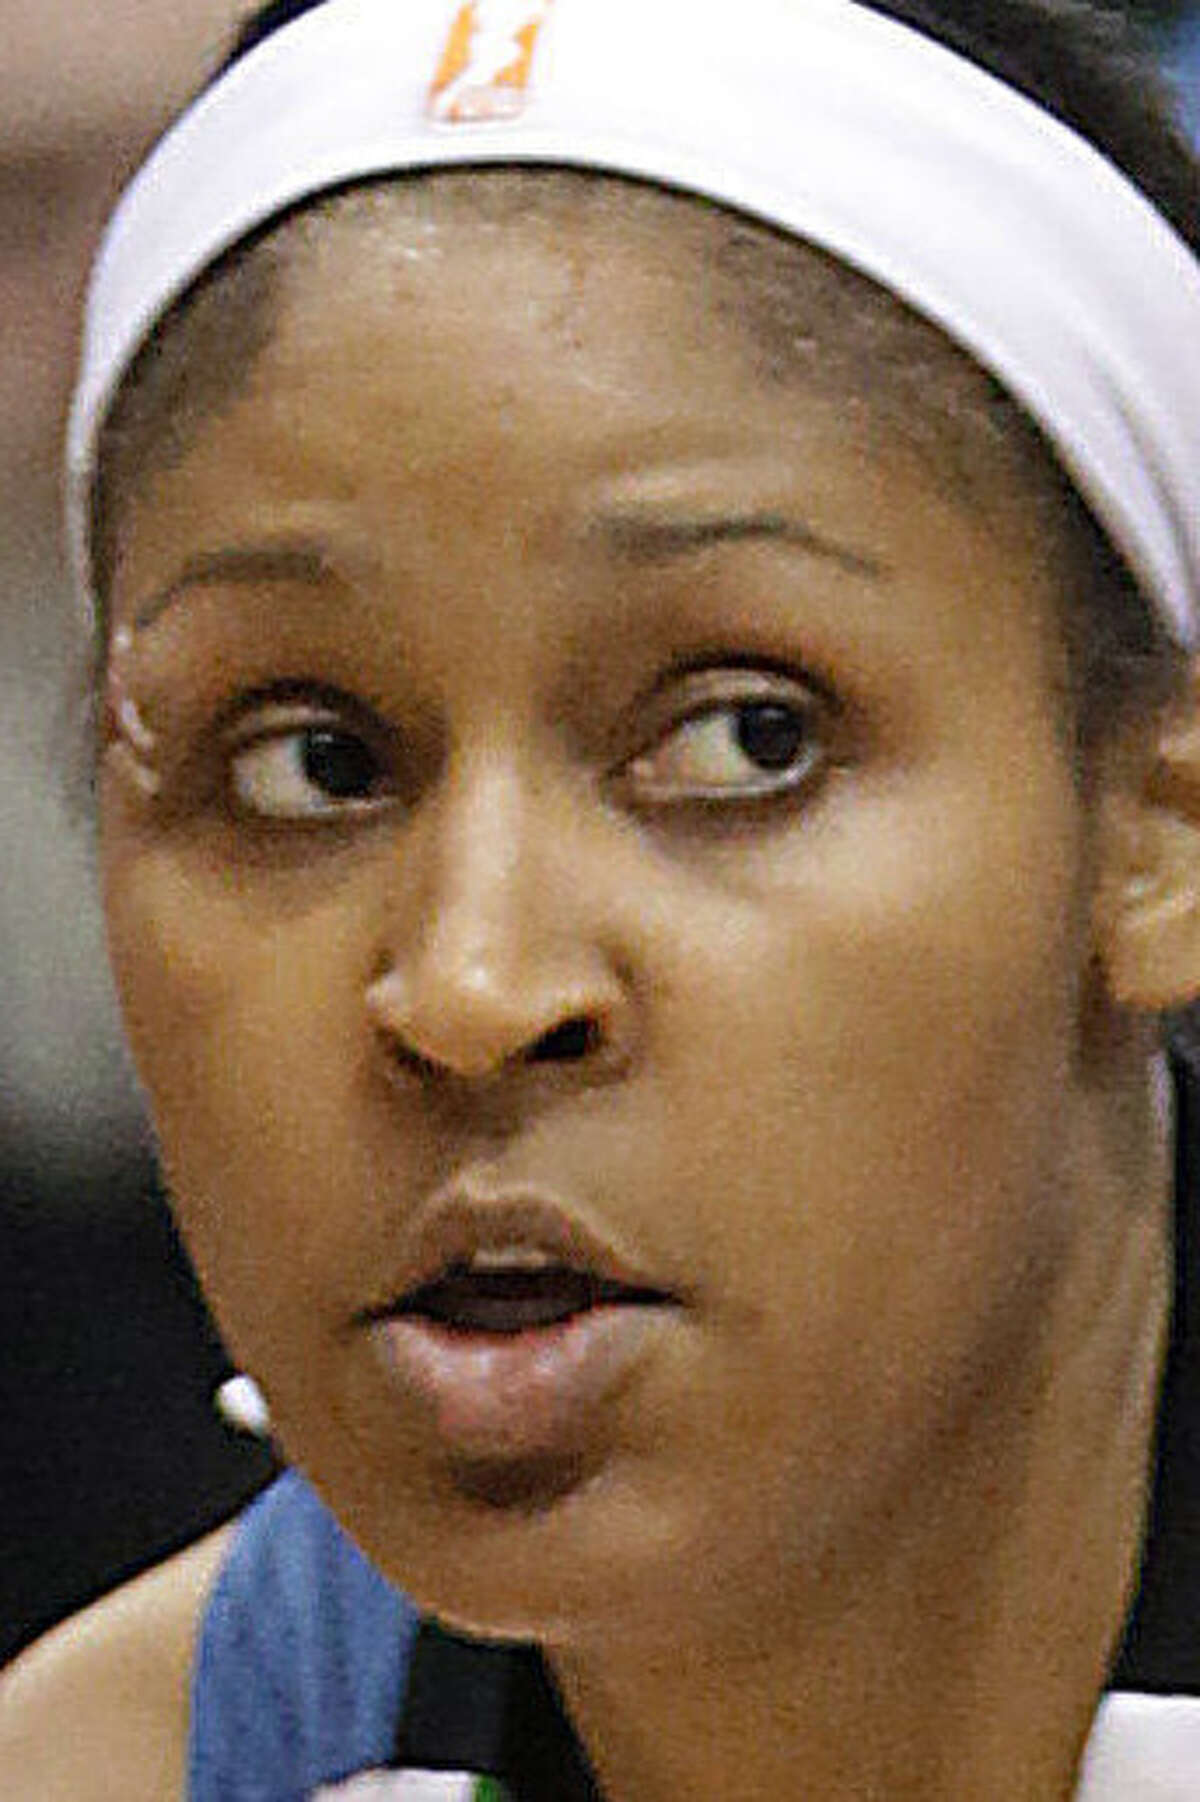 Lynx forward Maya Moore finished with 14 points.